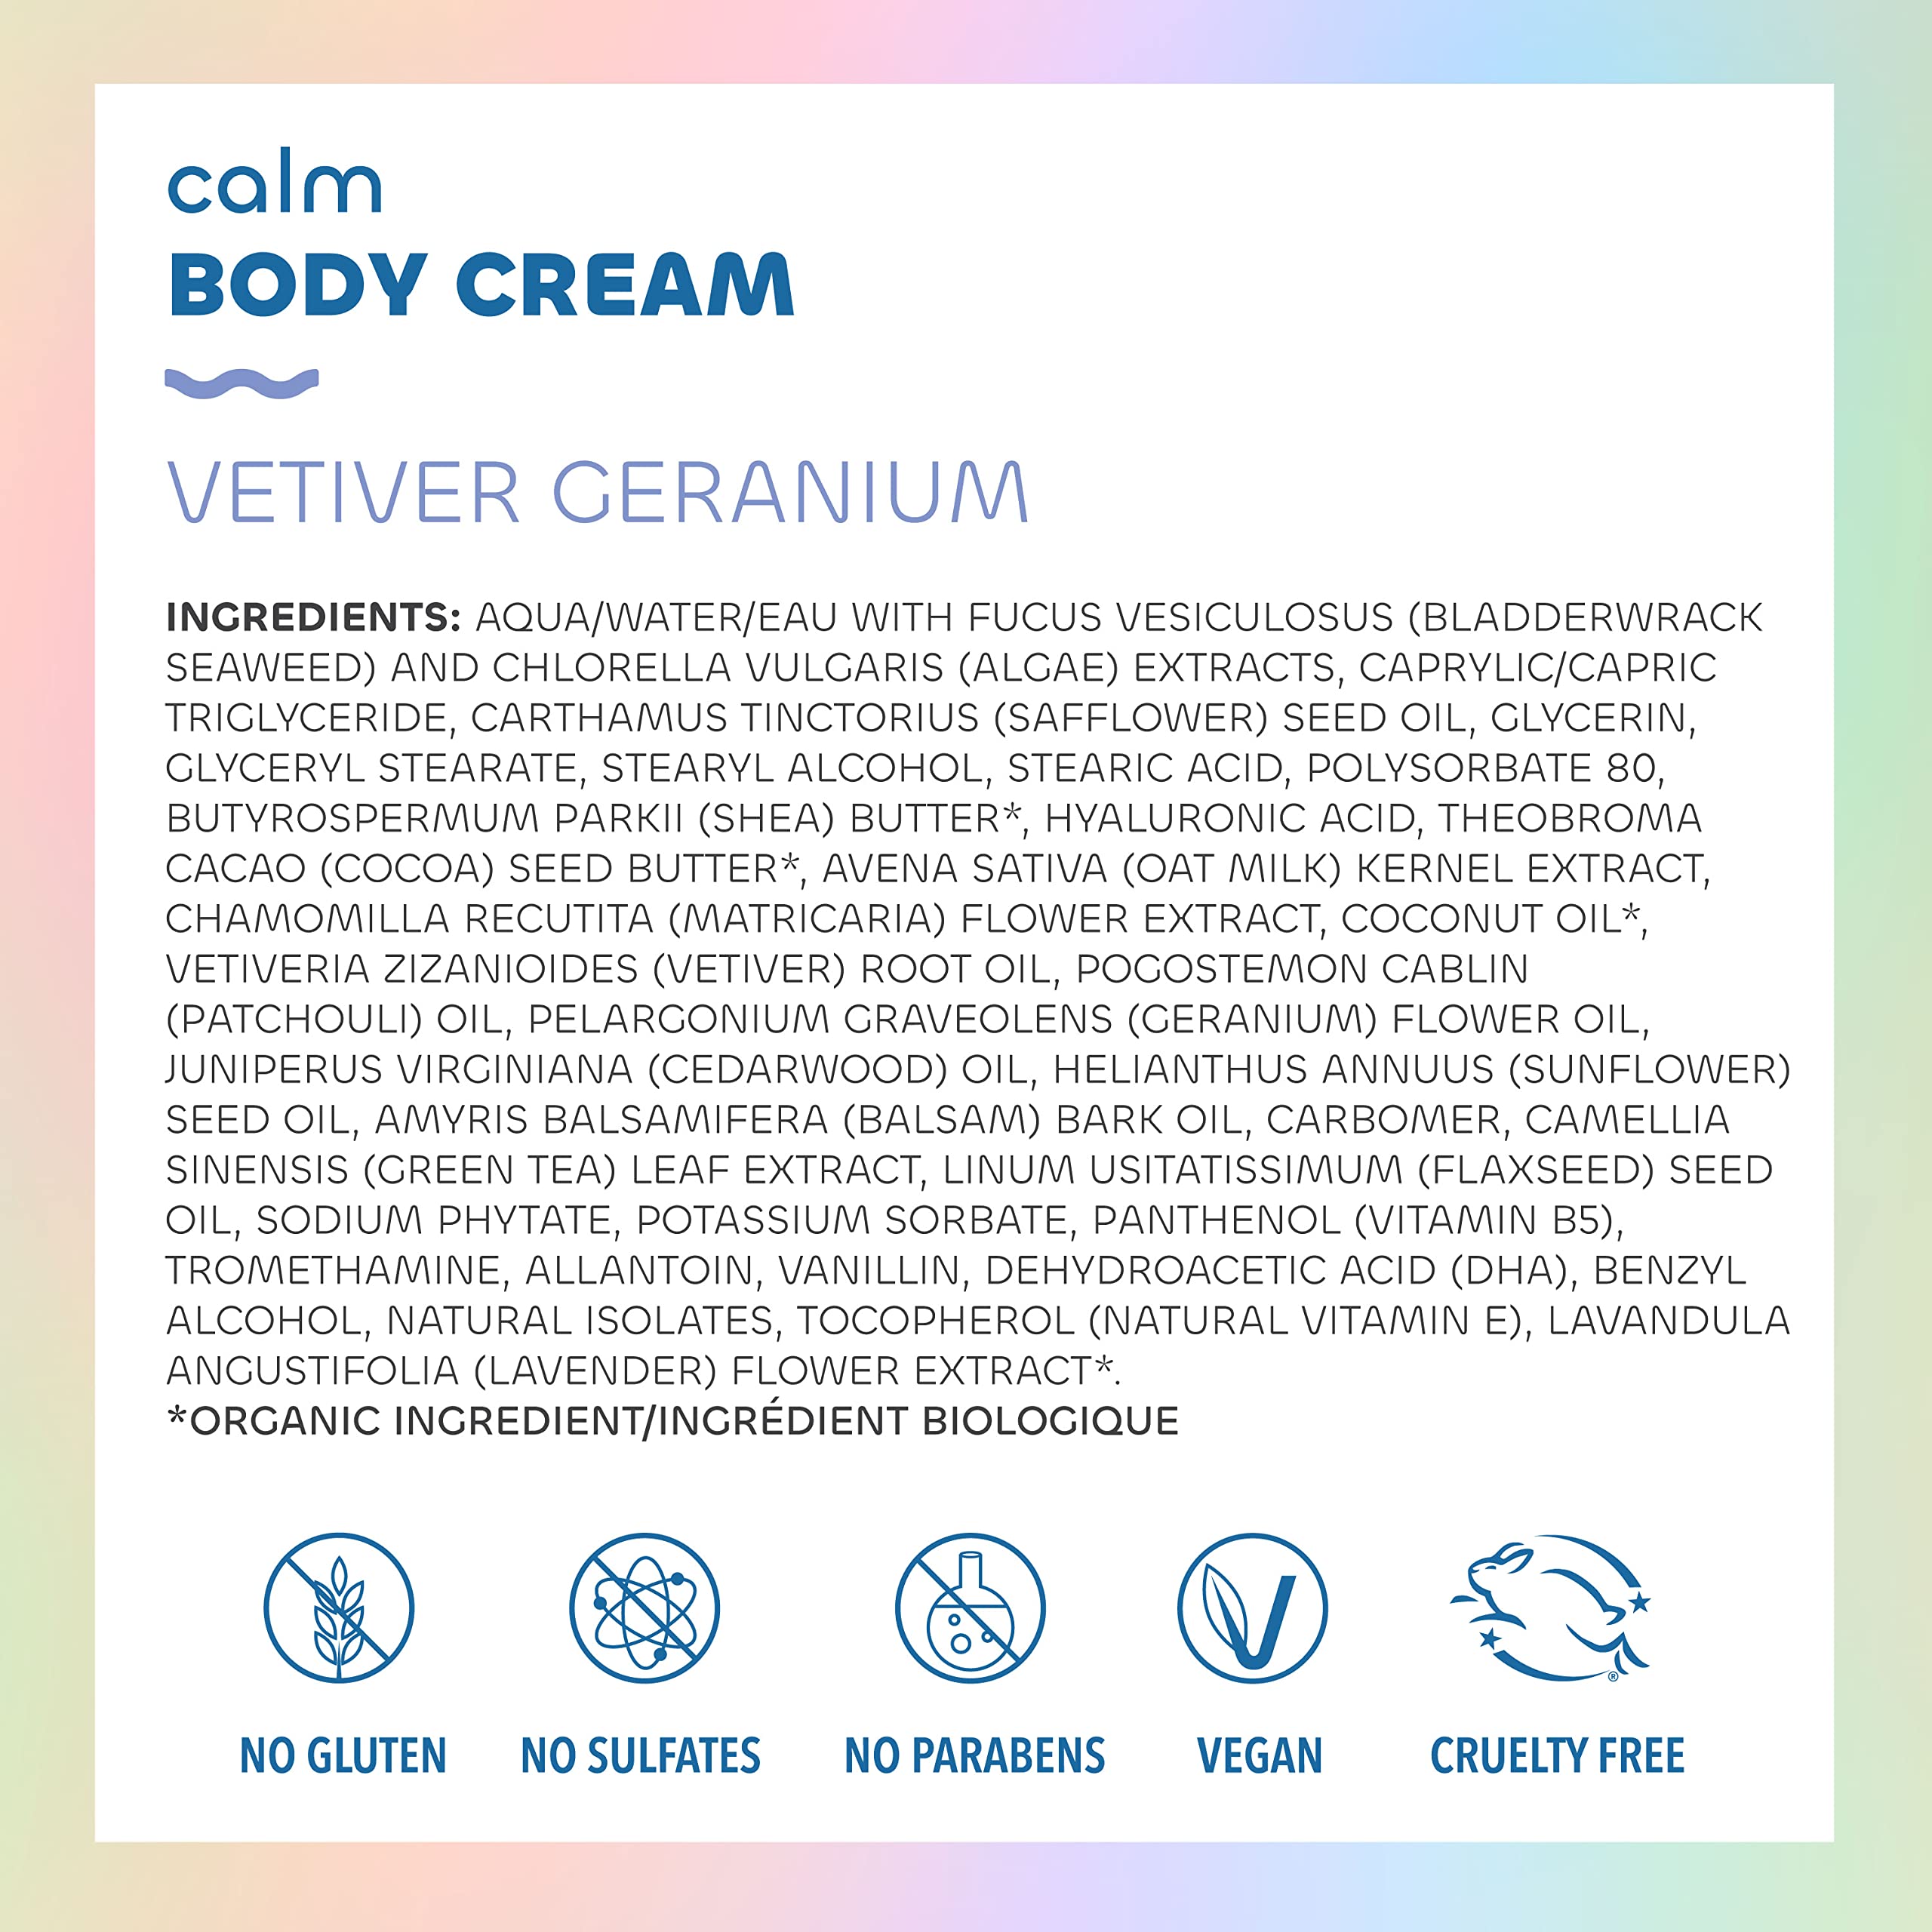 Seaweed Bath Co. Calm Body Cream, Vetiver Geranium Scent, 6 Ounce, Sustainably Harvested Seaweed, Oat Milk, Chamomile